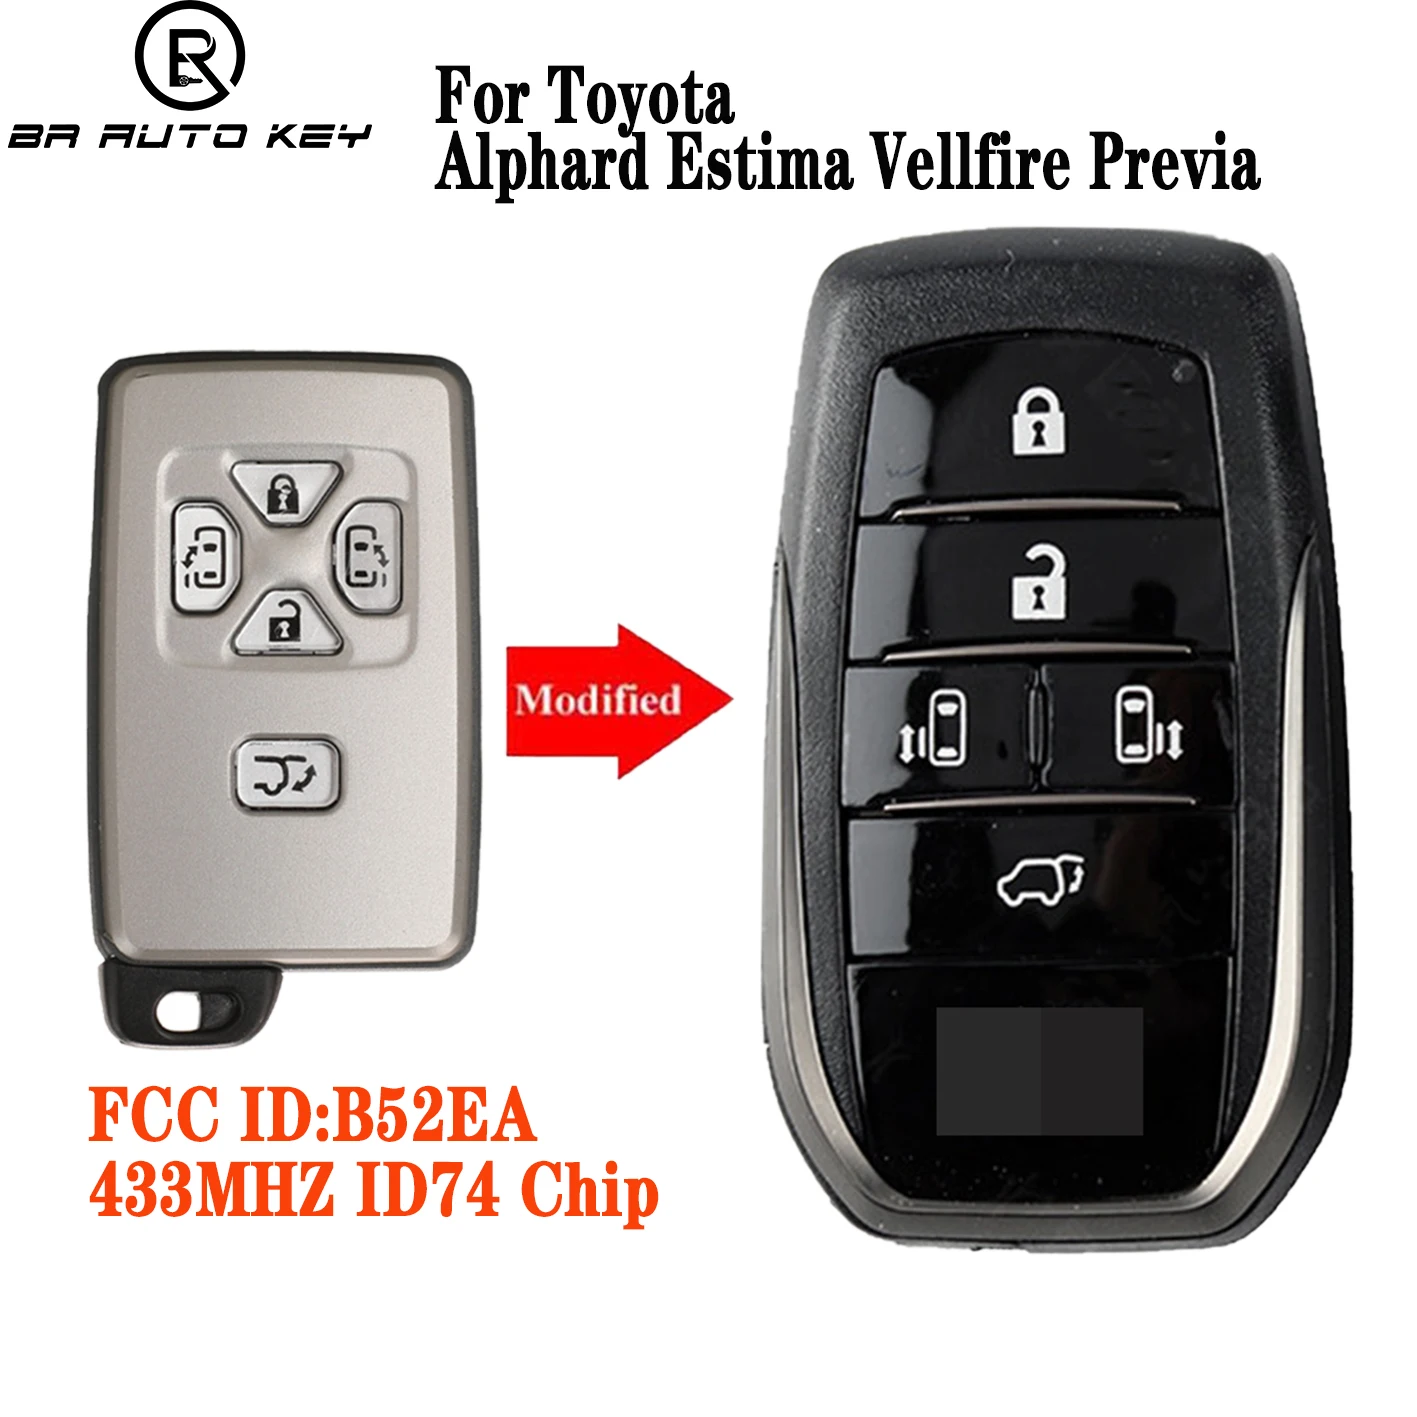 Upgrade Replacement Smart Remote Key for Toyota Alphard Vellfire Previa Voxy Noah 2008-2014 B52EA 433MHz ID71 Chip 89904-28124